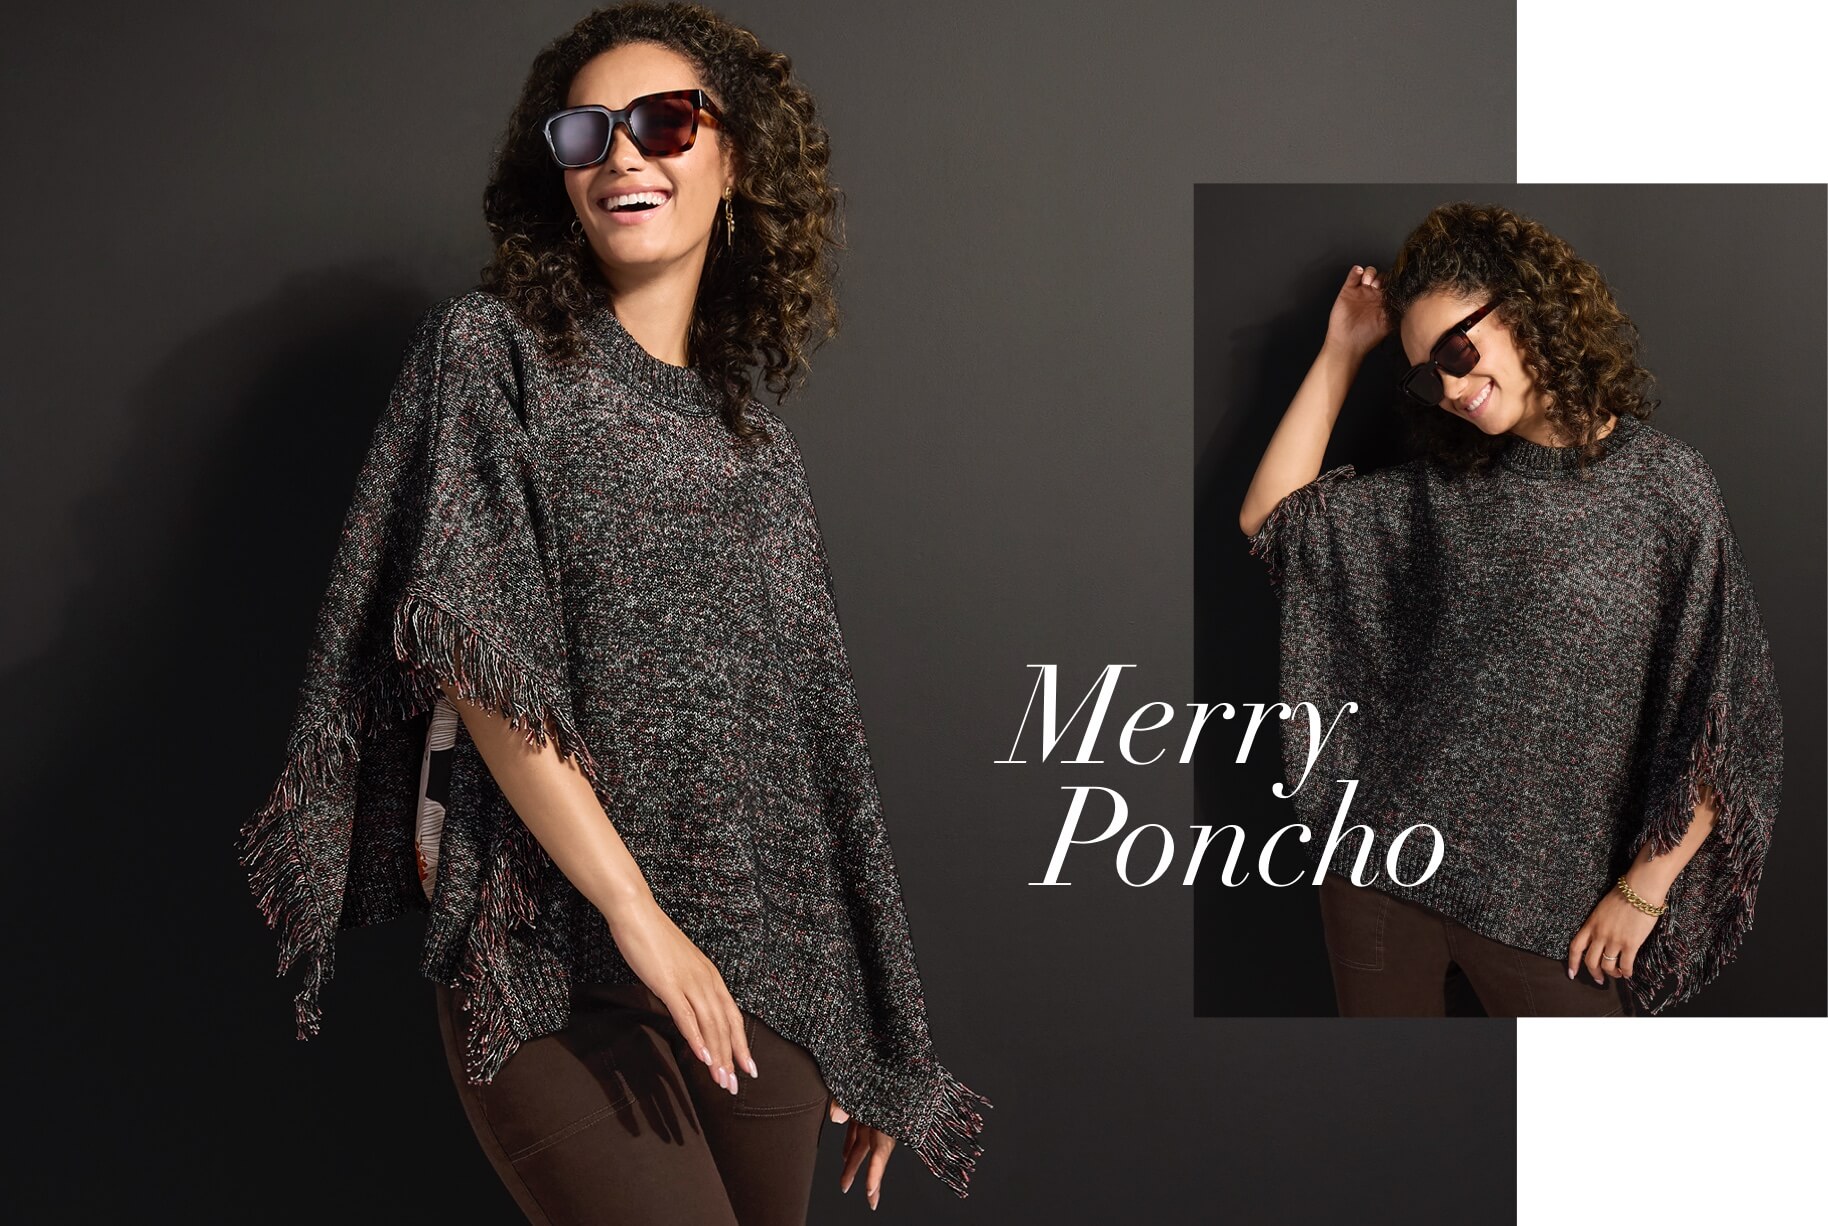 Merry Poncho in Toasted Almond, Compass Pant in Chocolate